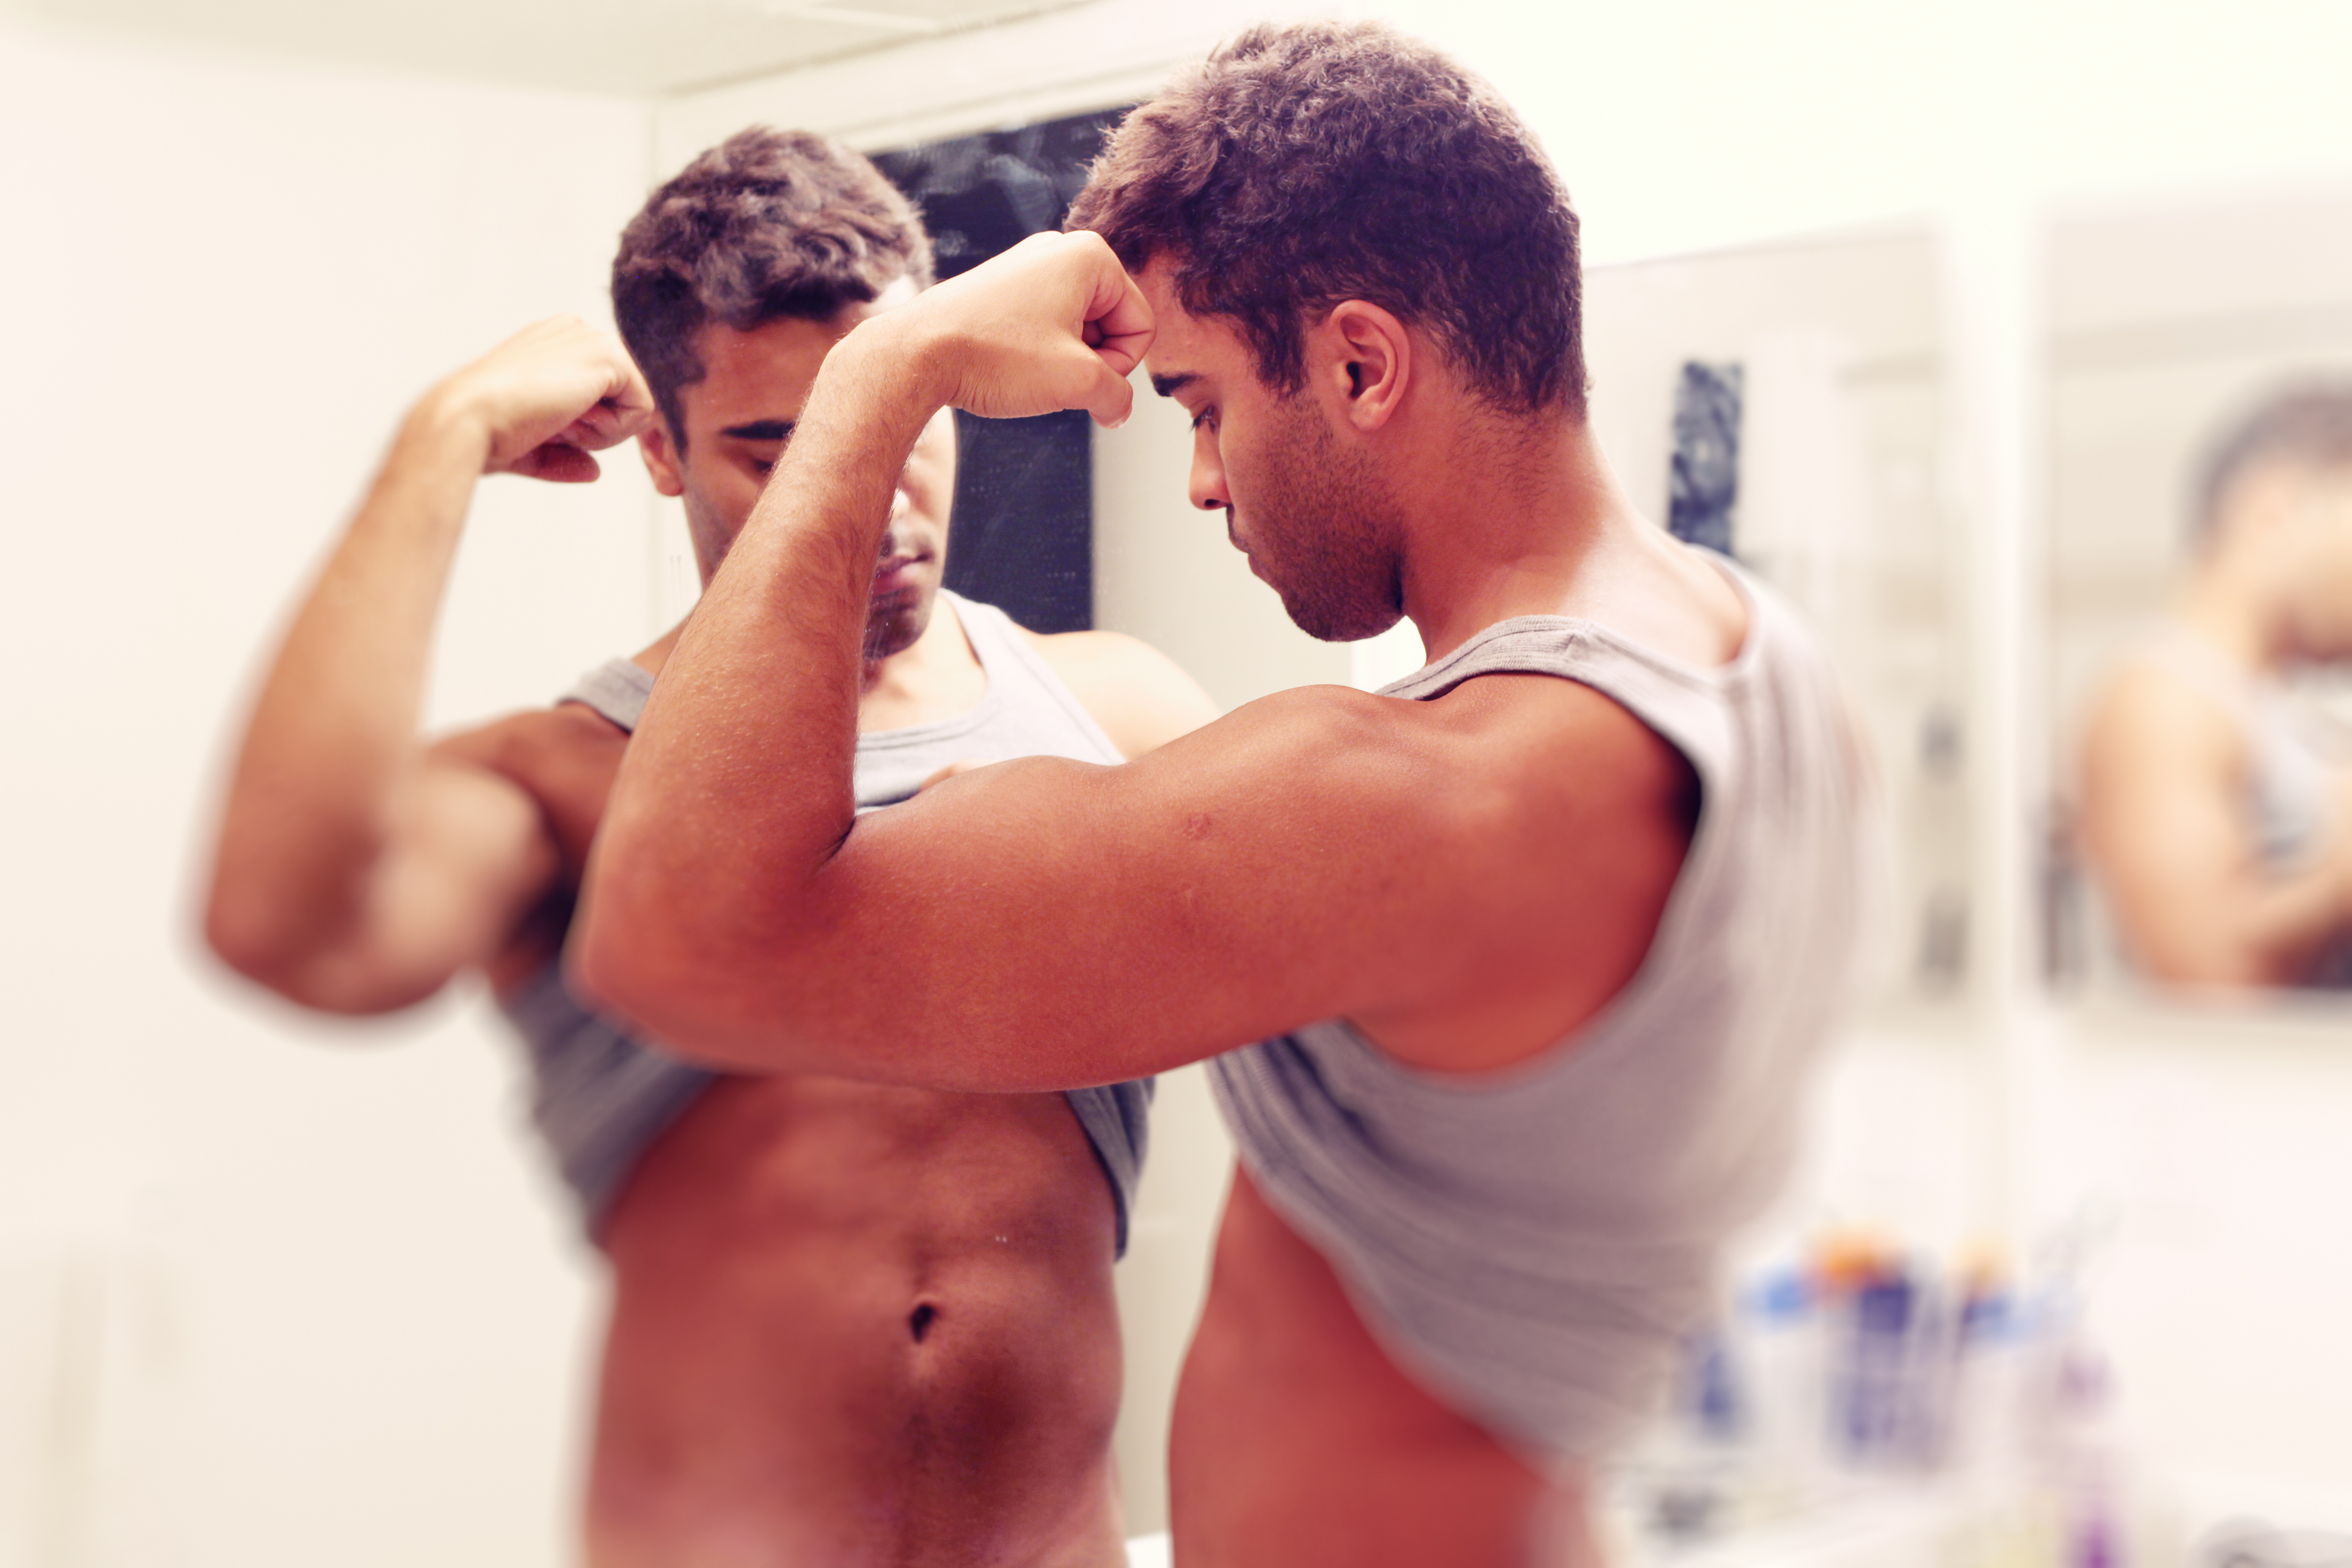 Body dysmorphia in males – what to look out for